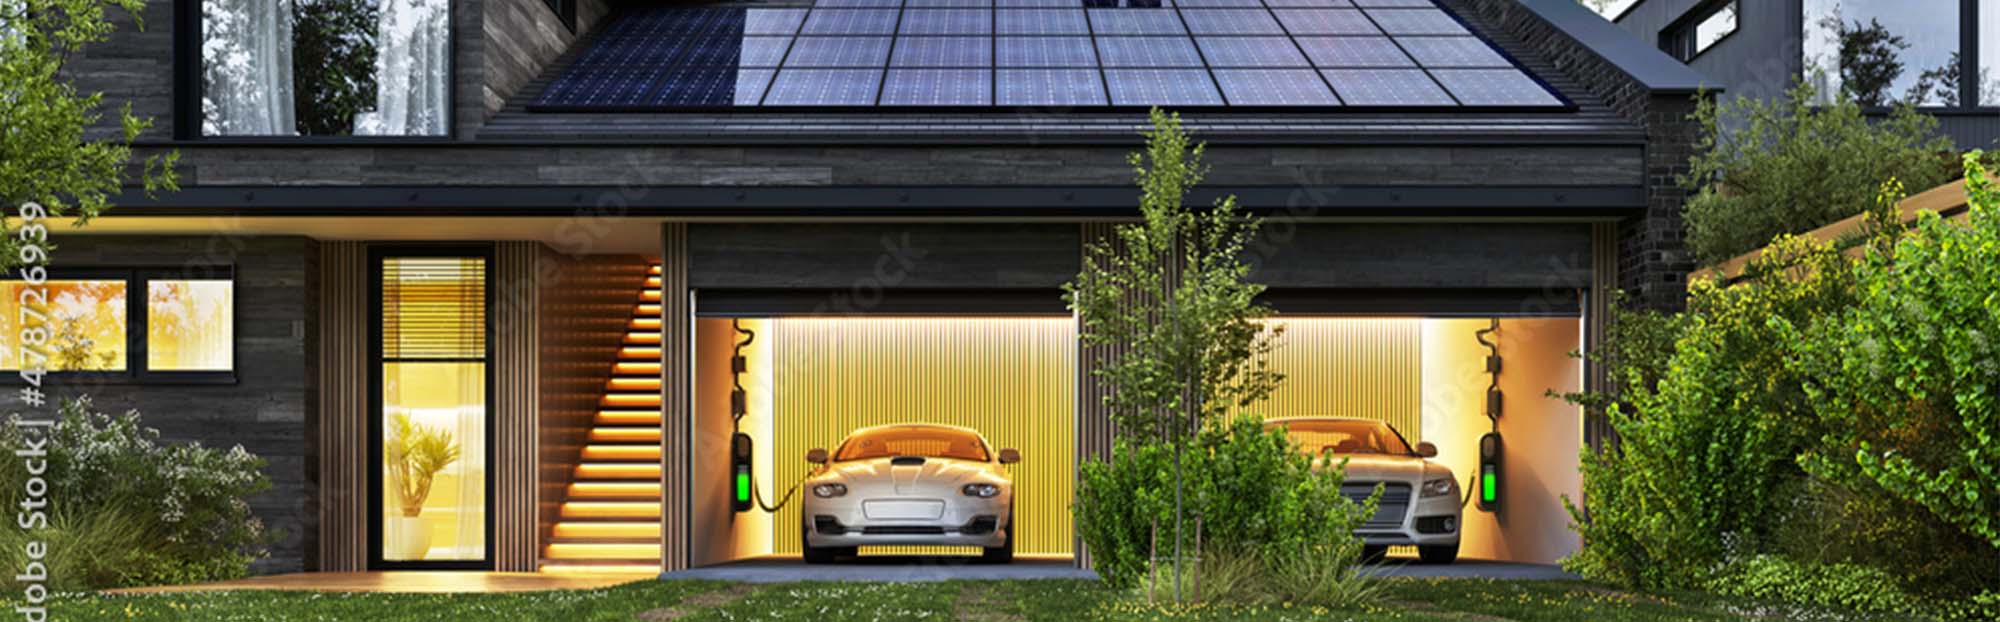 electric cars charging in house with solar panels